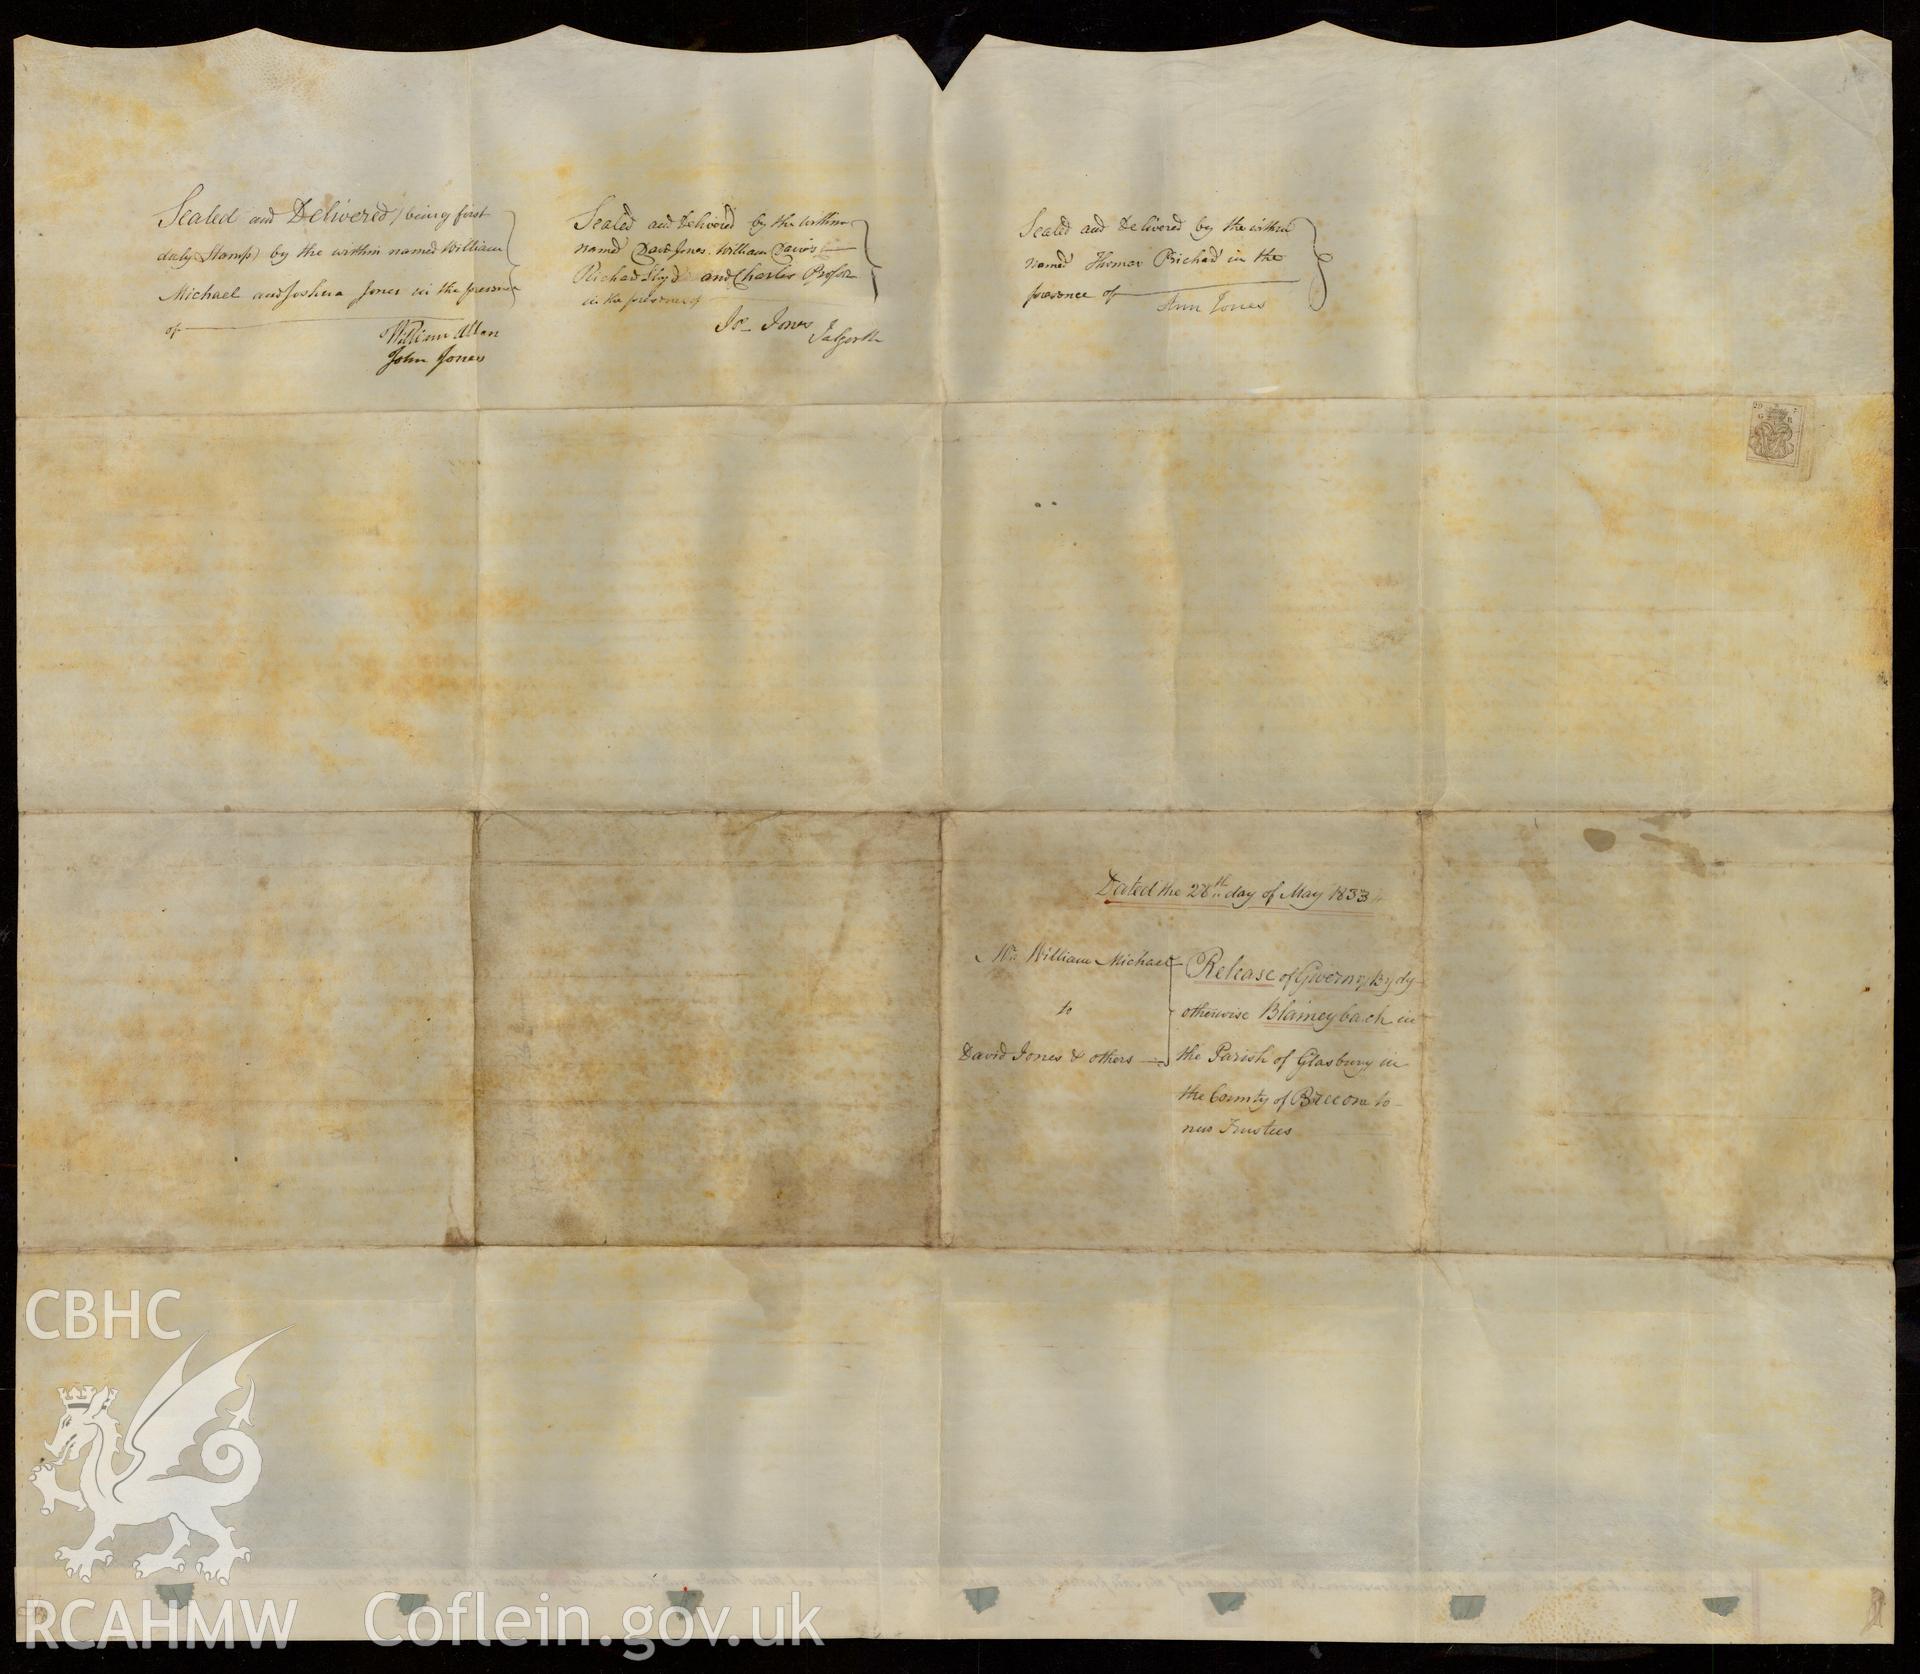 Indenture scrolls of Maes-yr-onen Chapel, loaned for copying by the United Reform Church. Scroll dated 28 May 1833. Reverse view of scroll.